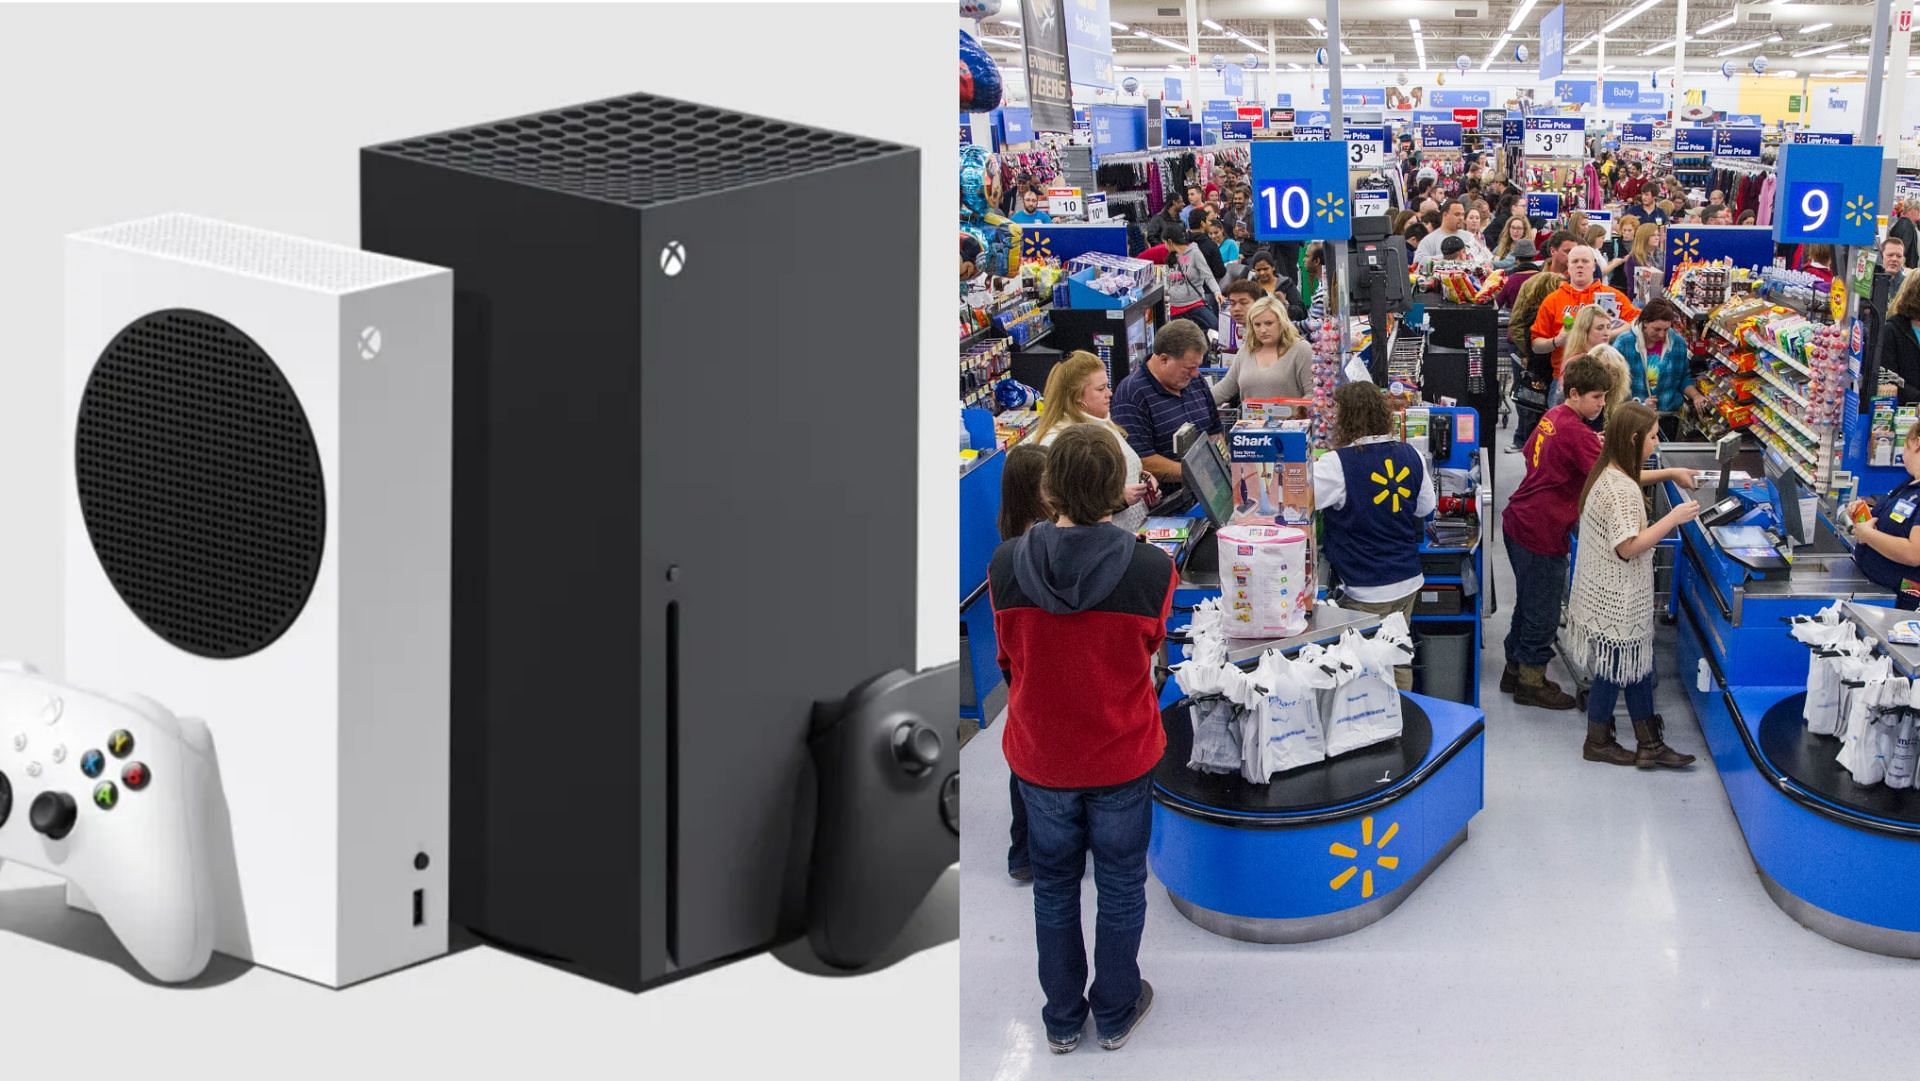 This could be the debut for the Xbox consoles on the Walmart Black Friday sales (Images via Xbox, Fortune)